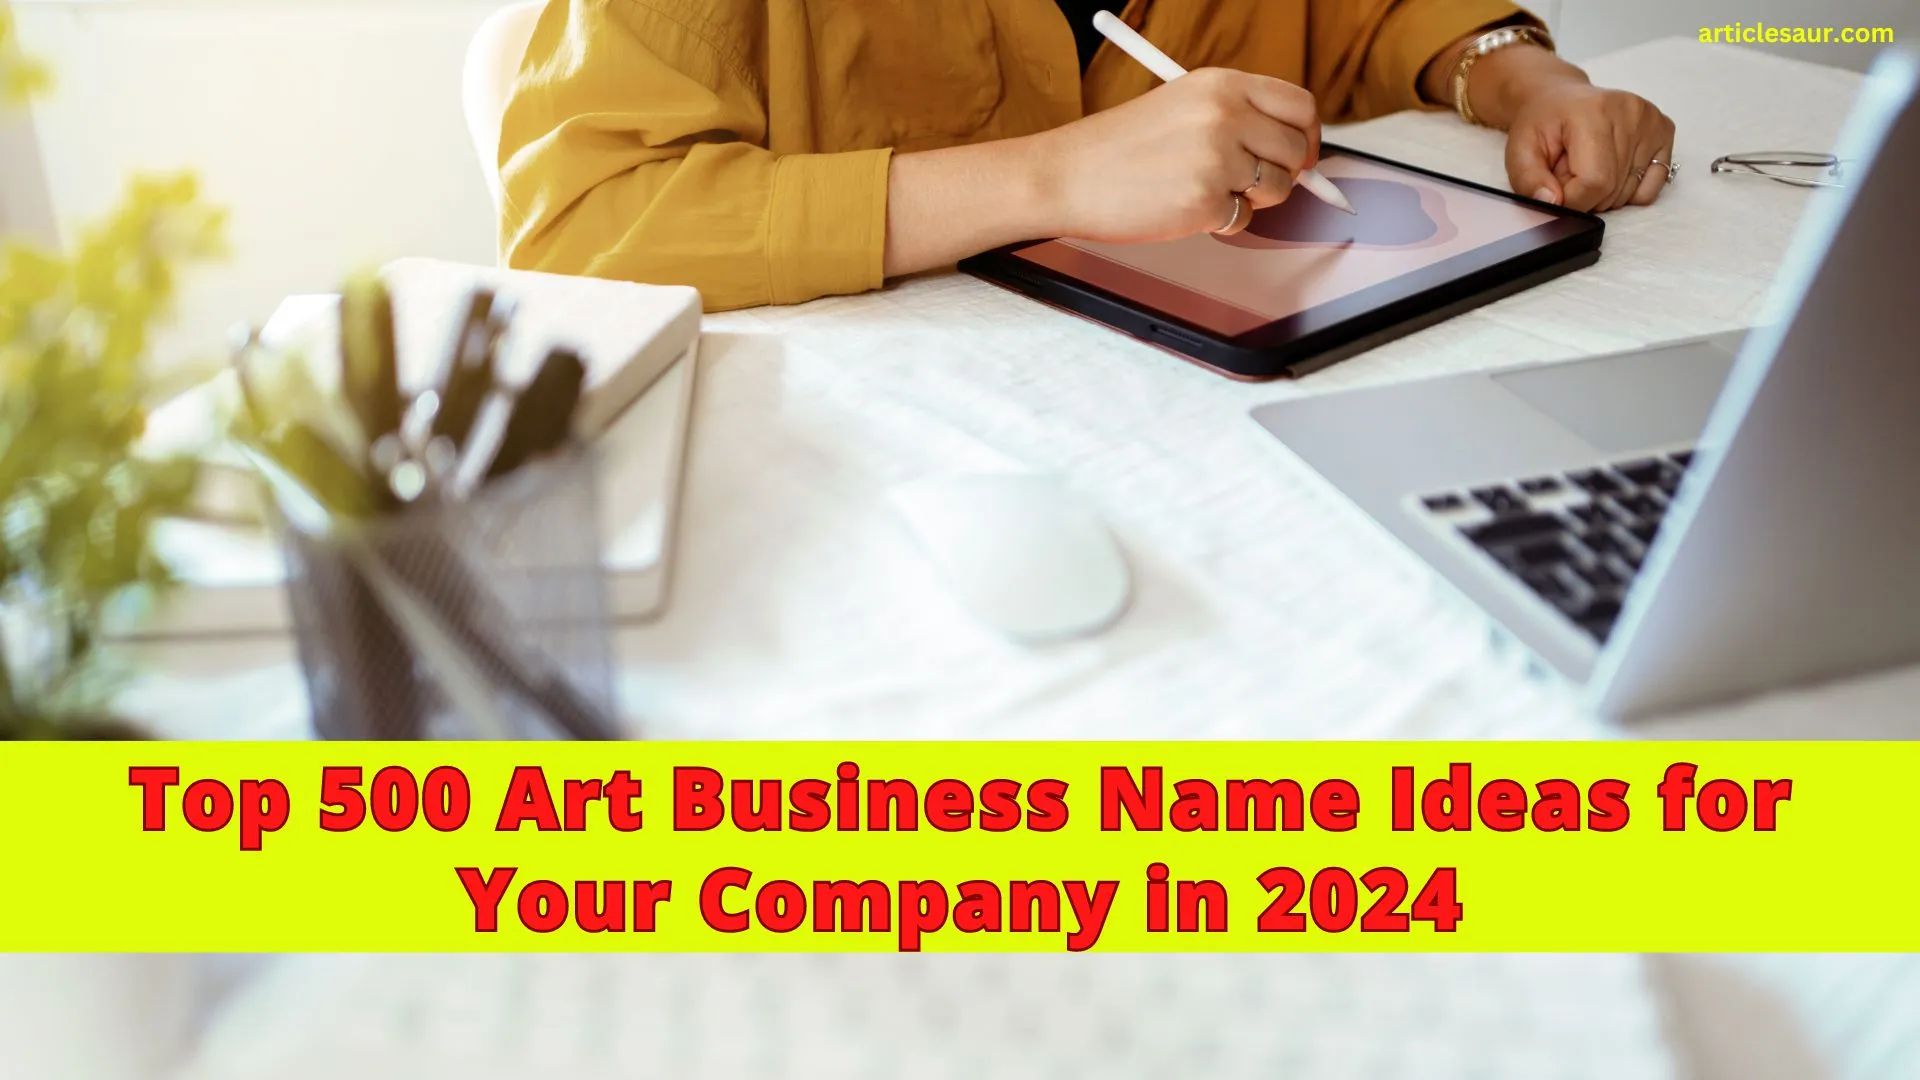 Top 500 Art Business Name Ideas for Your Company in 2024